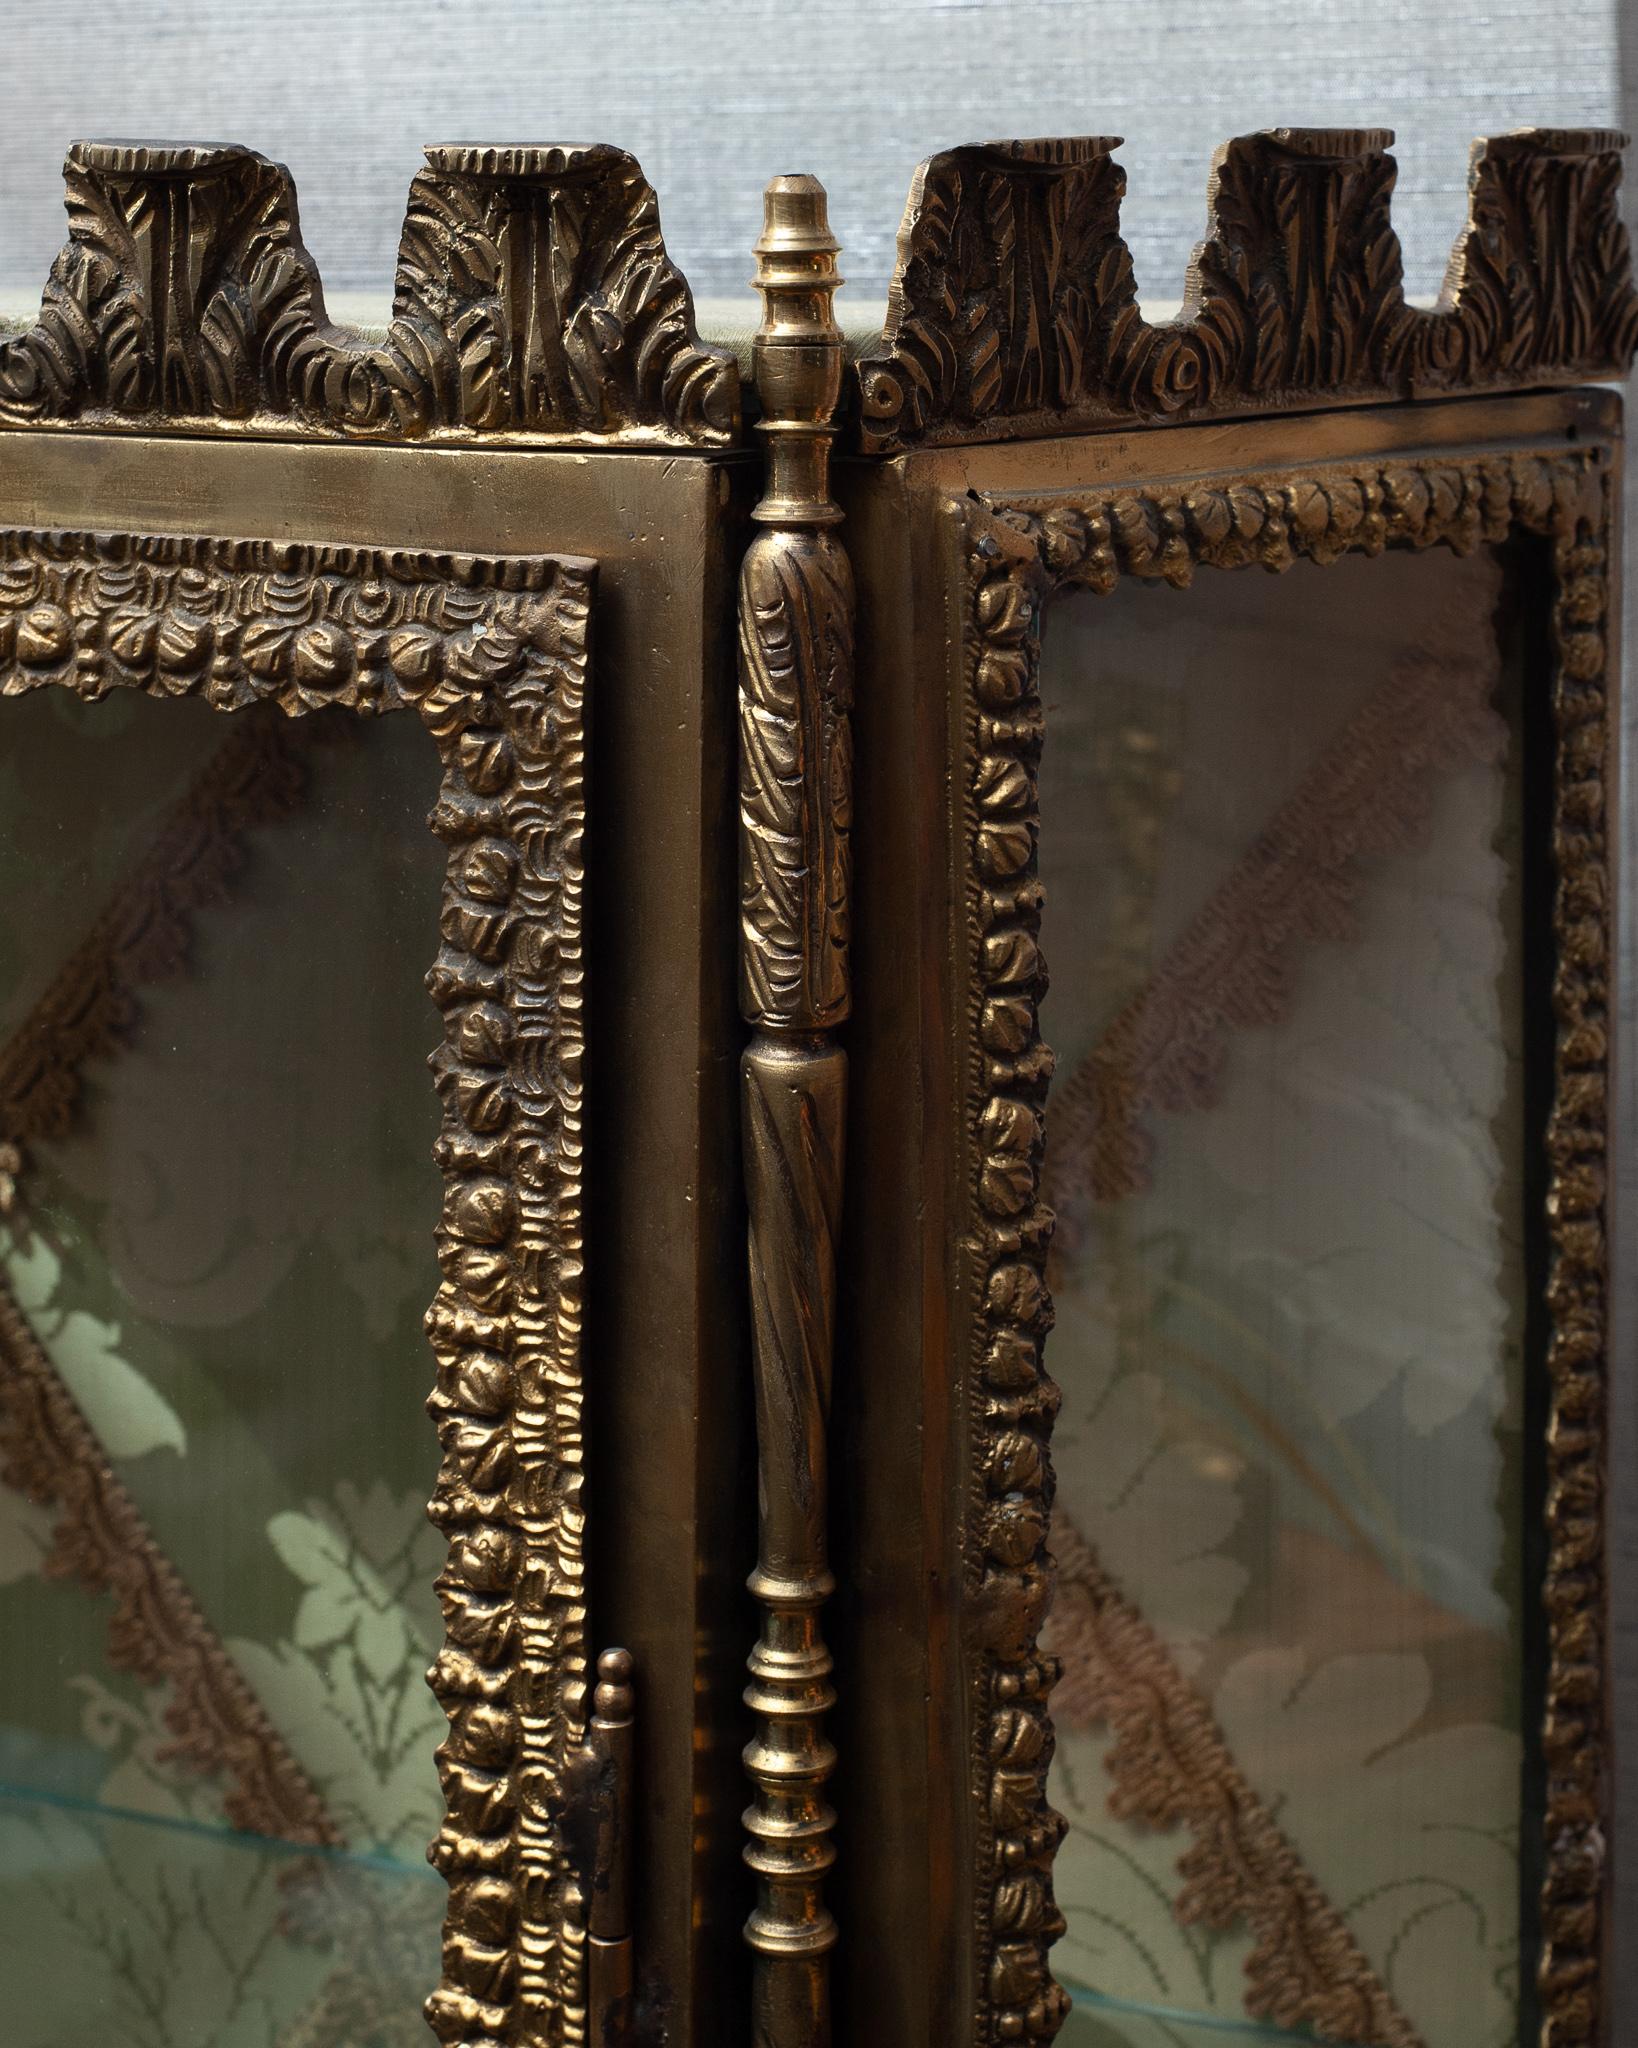 This extravagant antique bronze cabinet is piece worthy of your most precious possessions. The interior back panel is newly upholstered in a pale green silk damask fabric with vintage metallic trim.